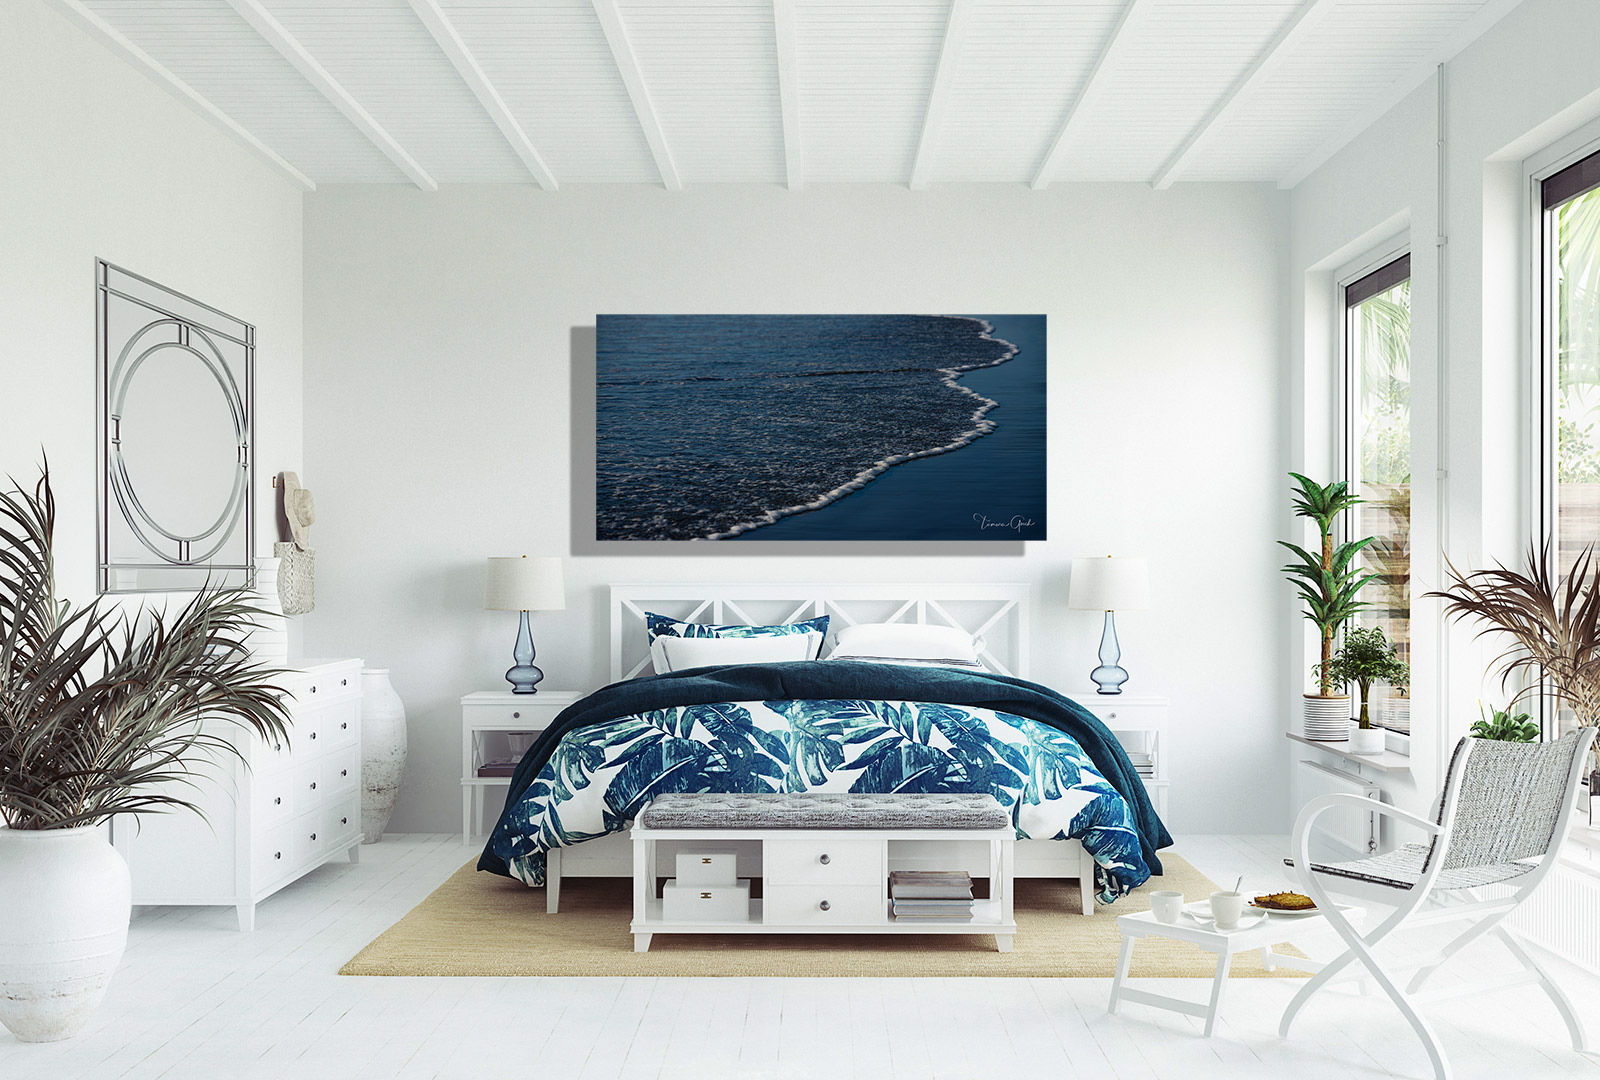 A fine art print titled "Ocean Shore Blues" by Tamara Gooch hanging in a bedroom. Printed on Aluminum or Metal, unframed.